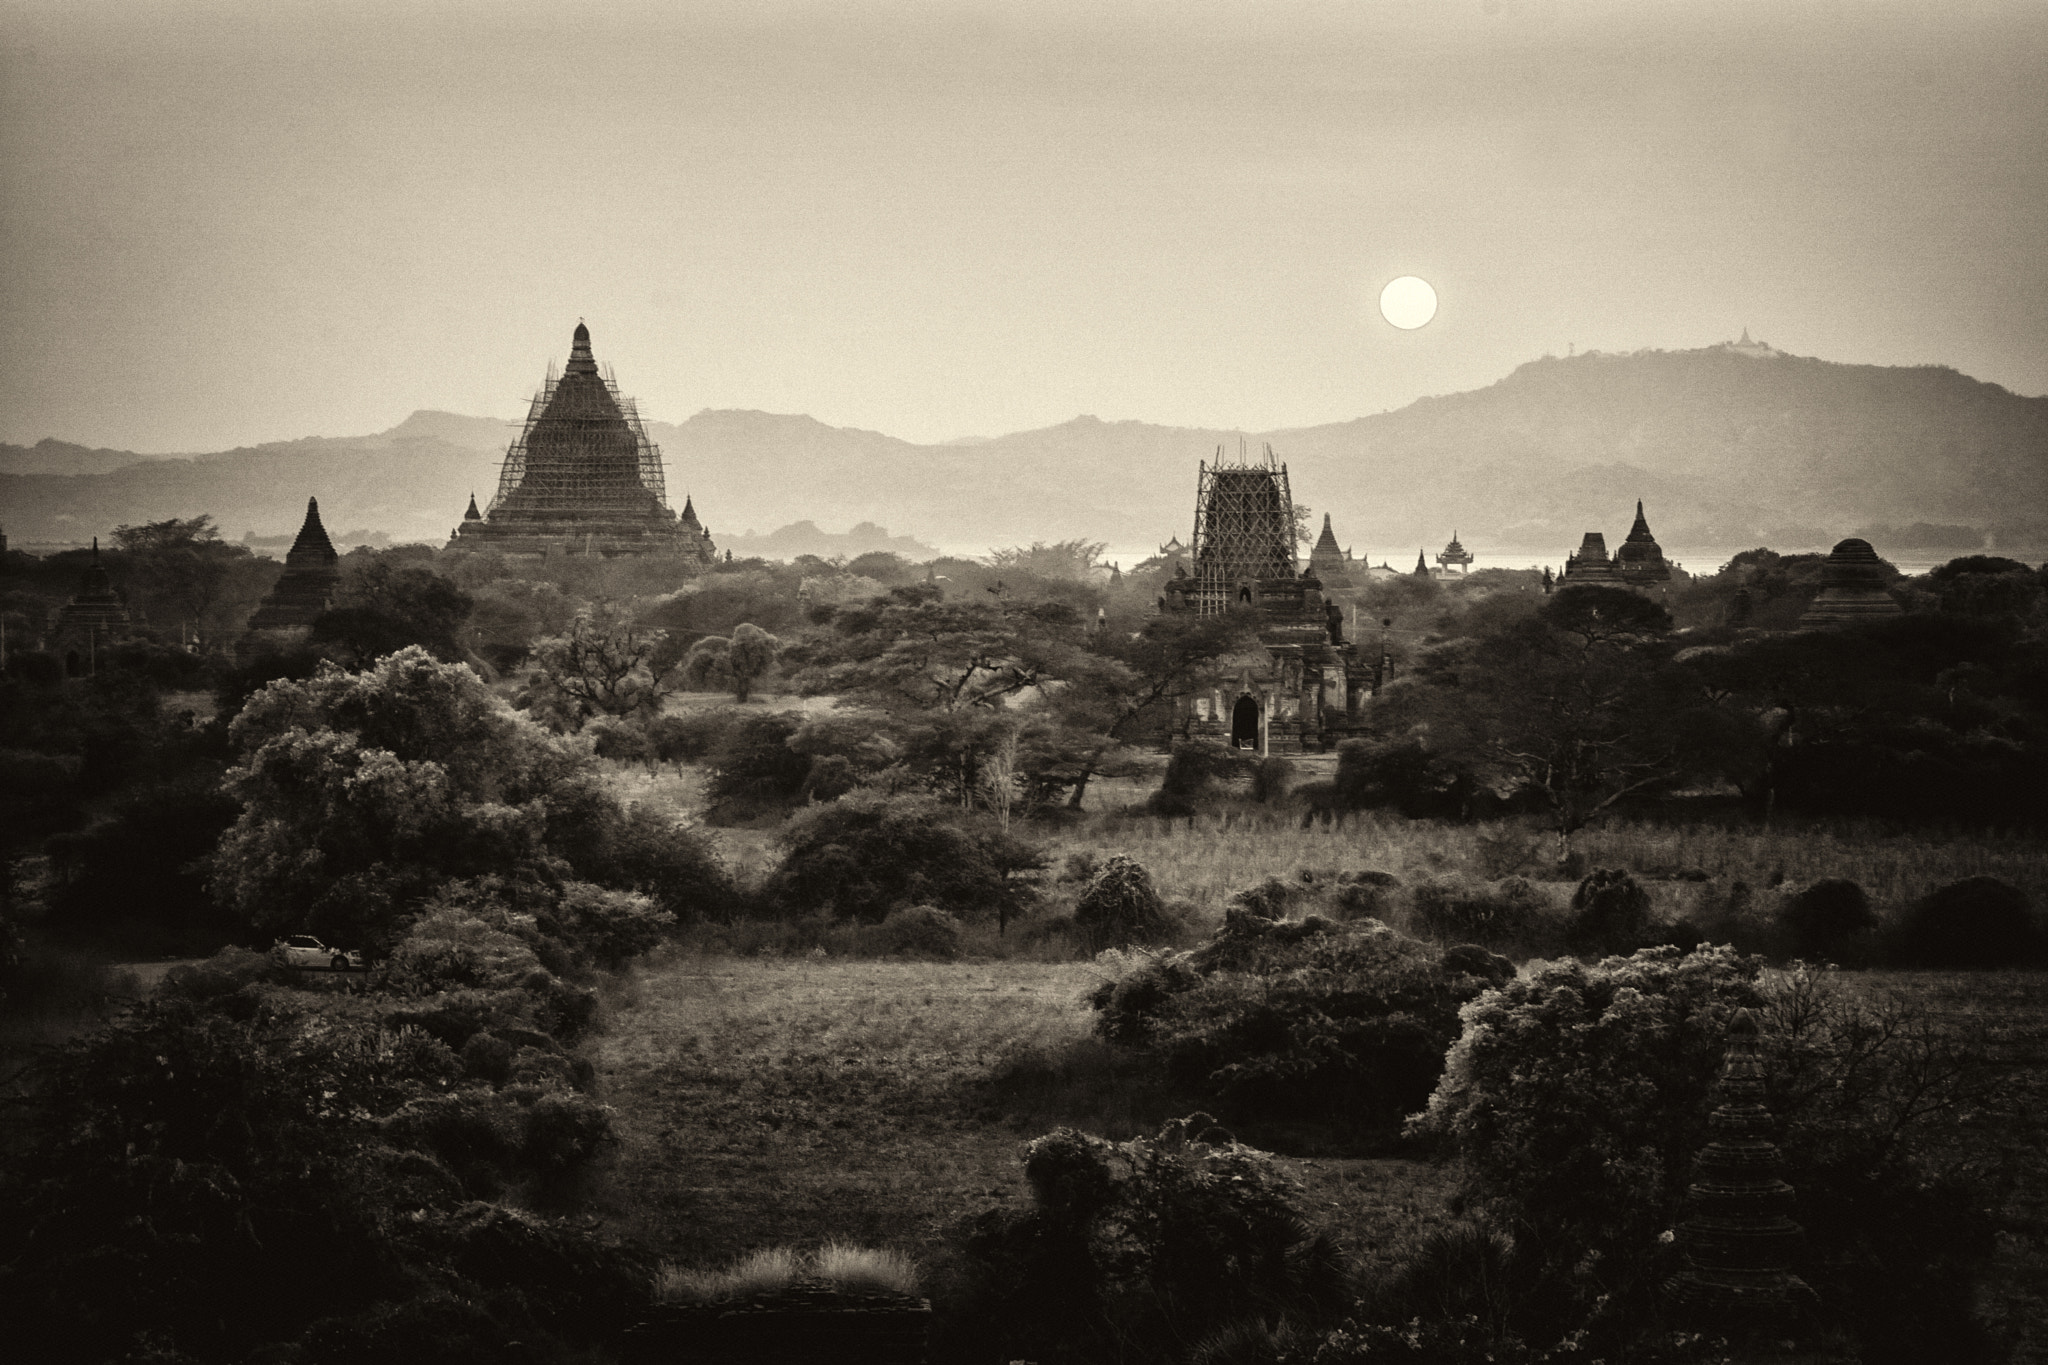 Sony ILCA-77M2 sample photo. Sunset at old bagan - myanmar photography